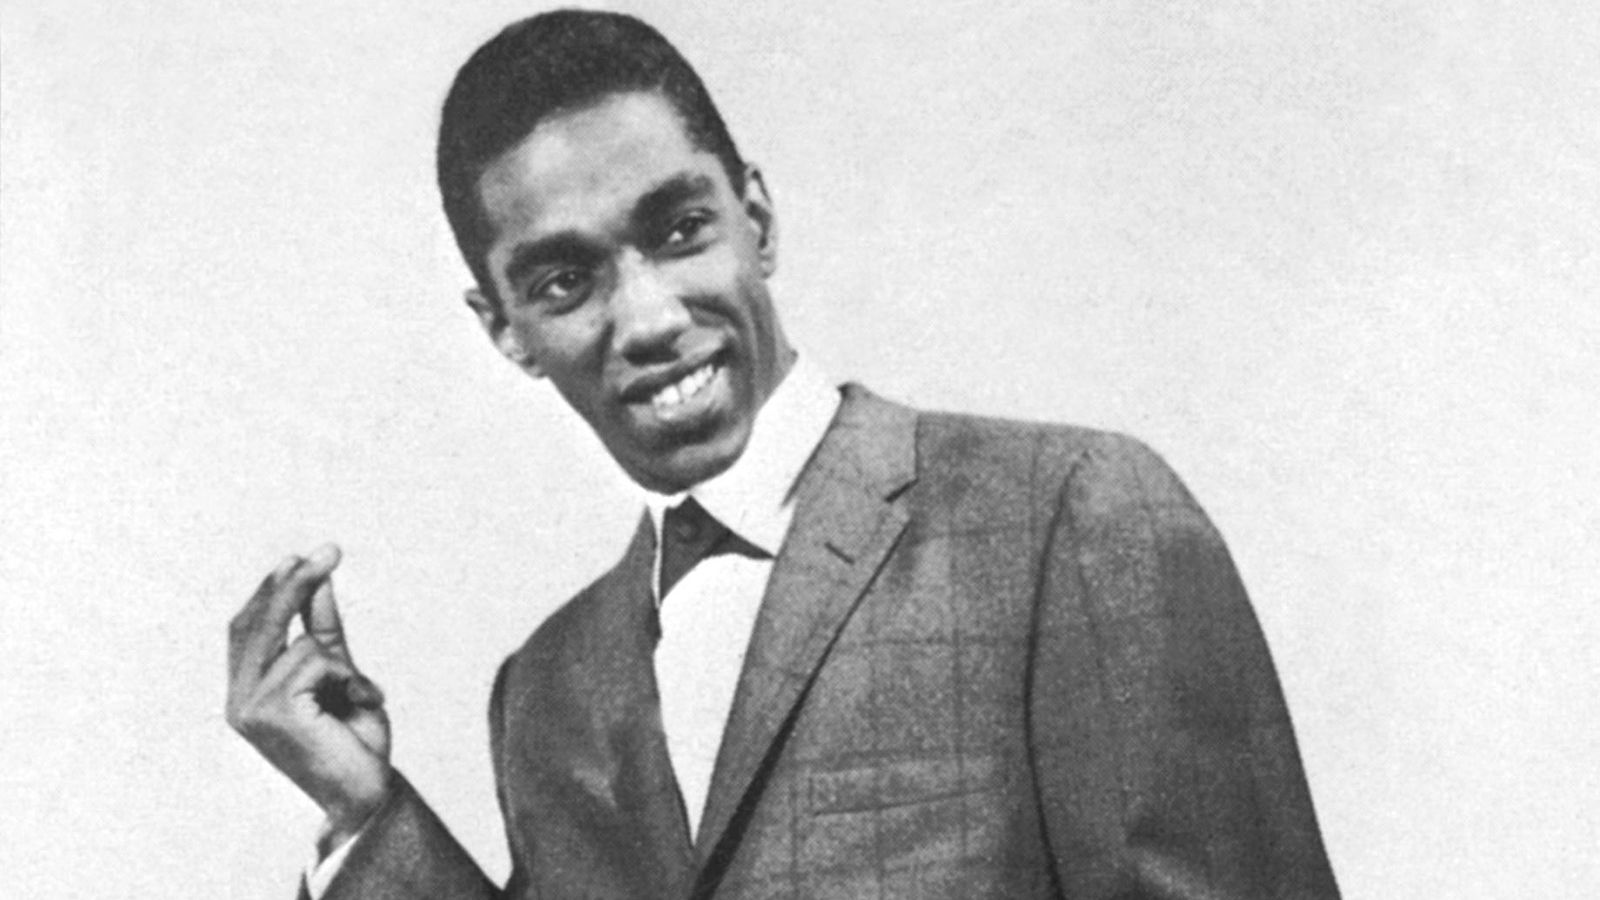 Barrett Strong: I Heard It Through The Grapevine writer and Motown's first star dies aged 81